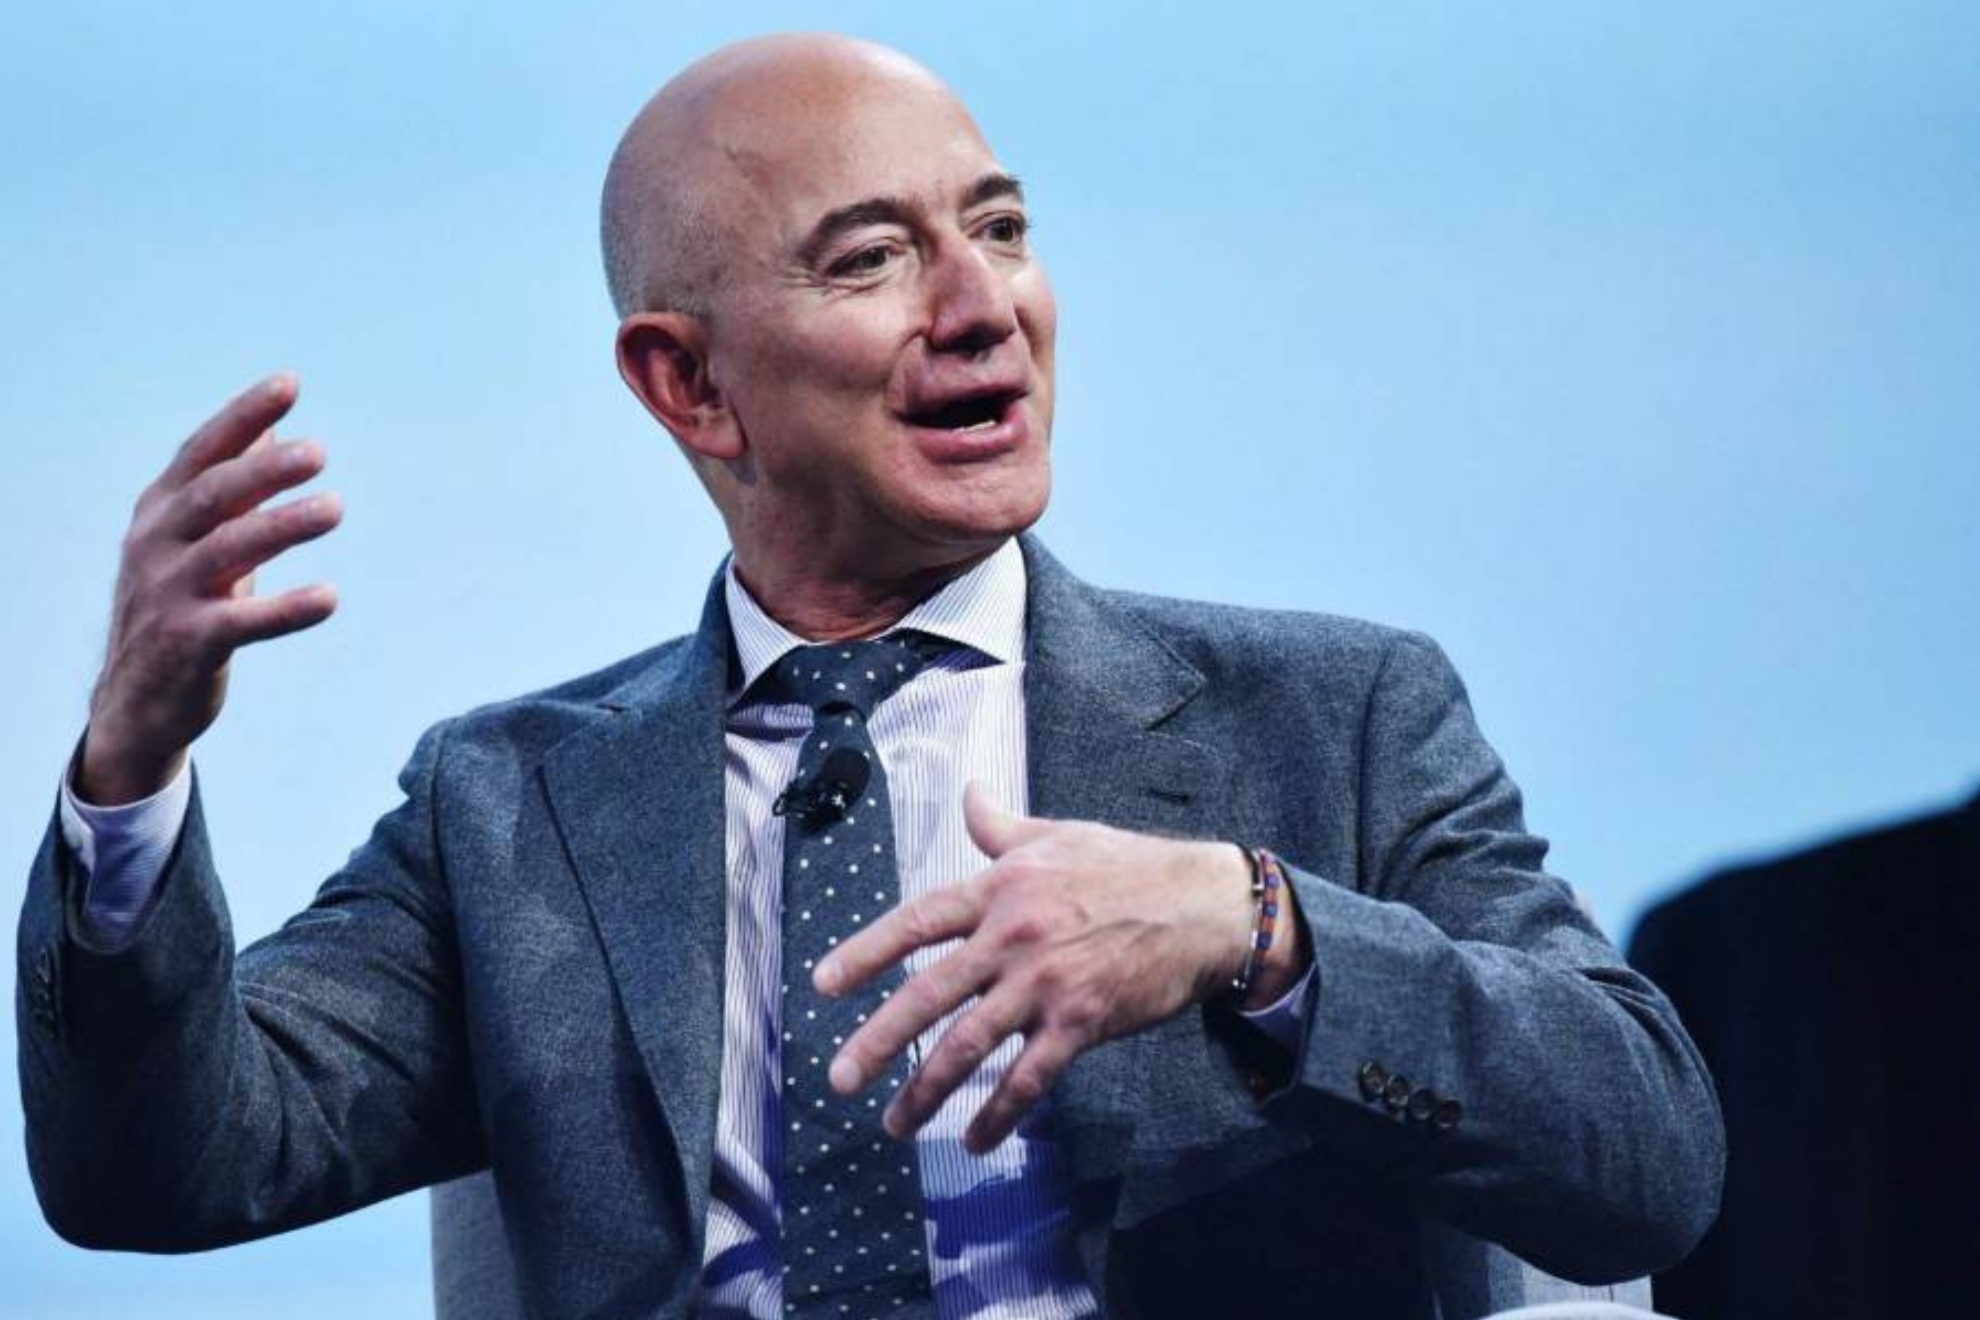 Jeff Bezos reveals that most of his fortune will go to charity before he dies